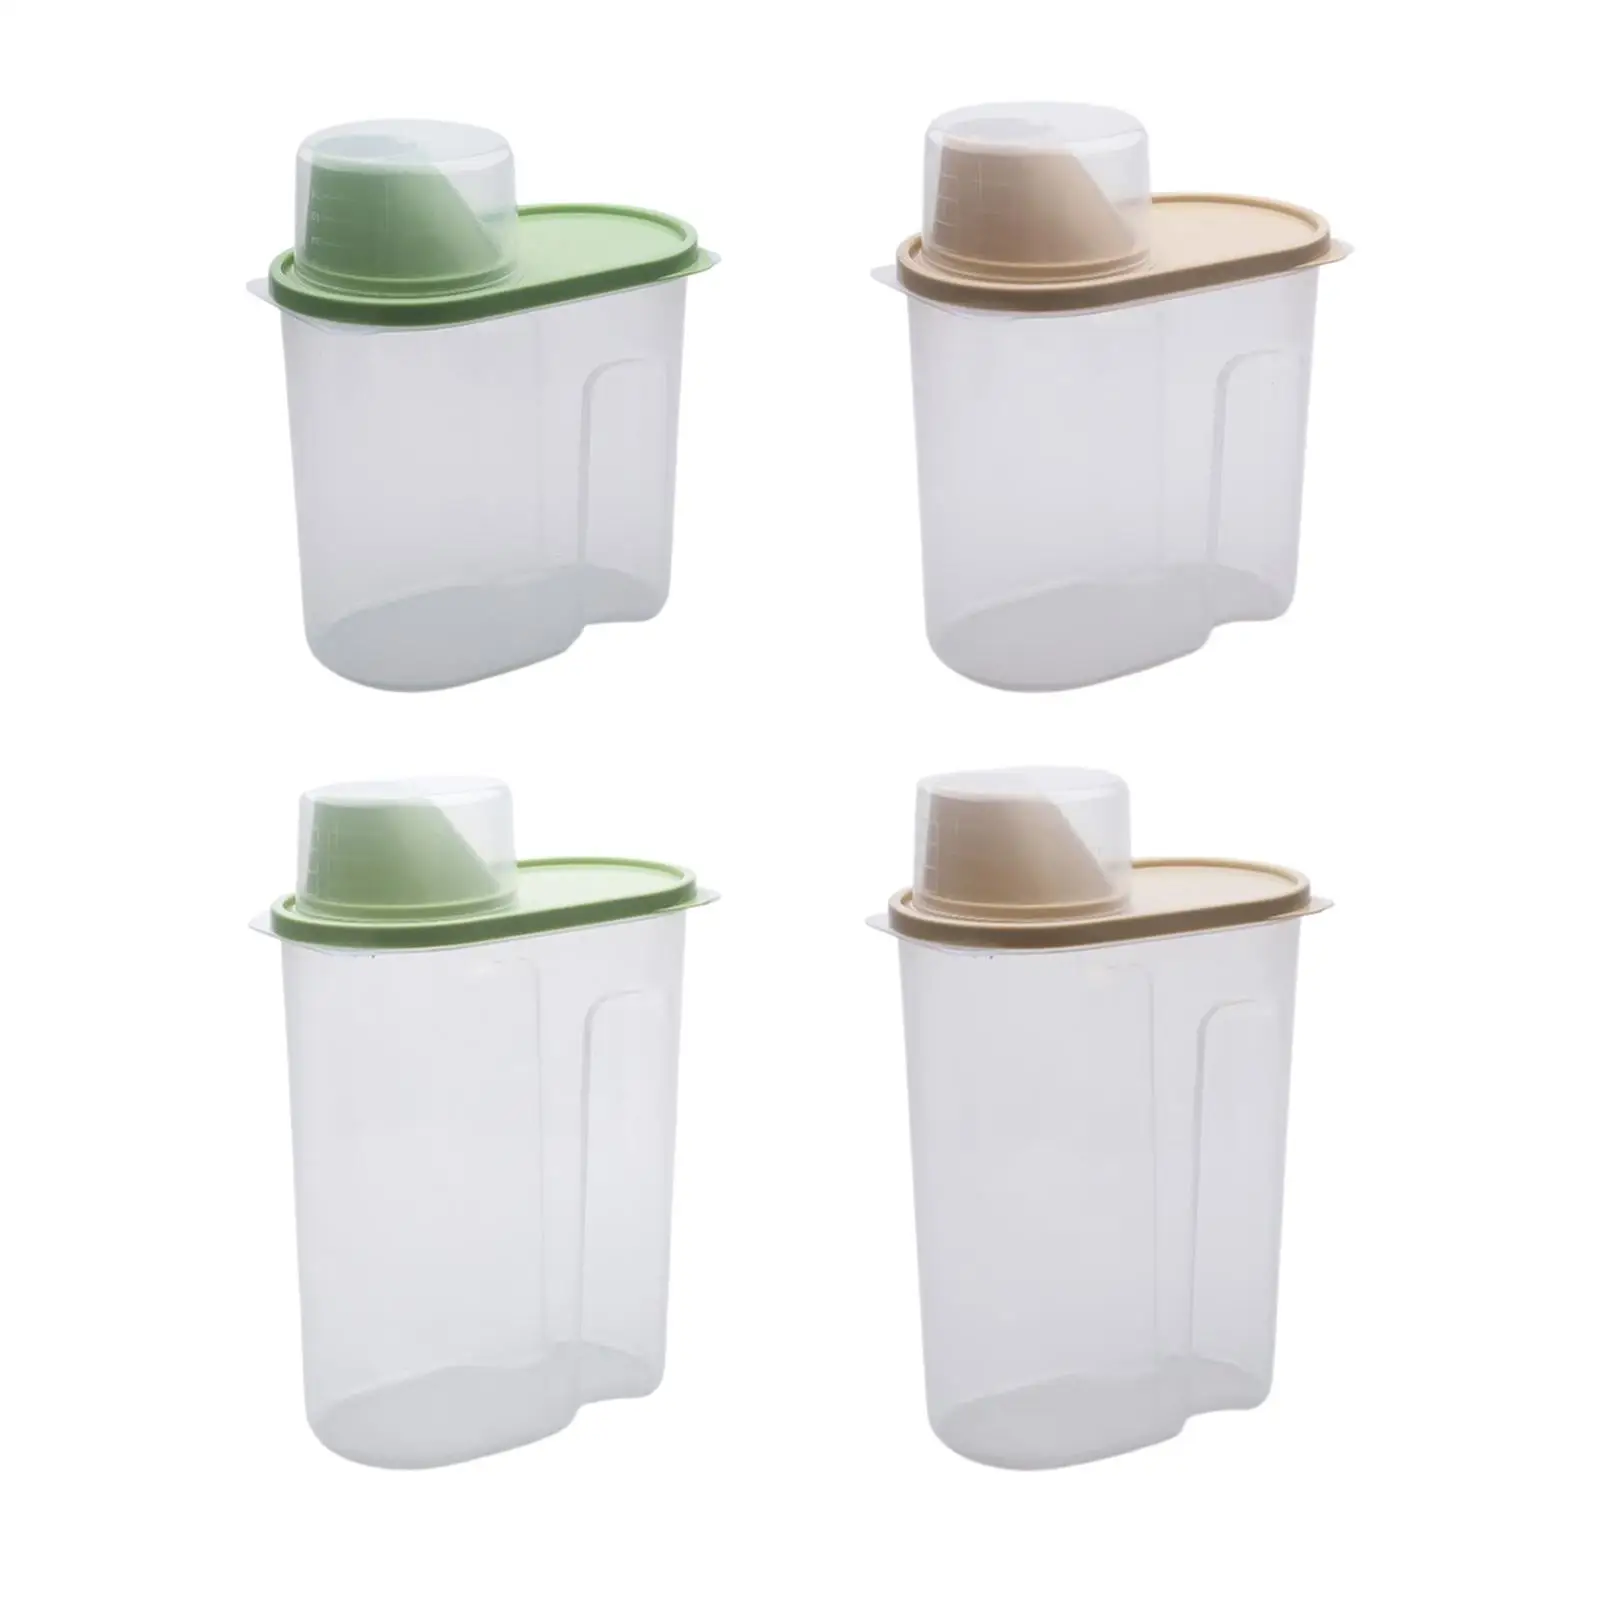 Cereal Storage Containers Kitchen Organization Pasta Containers for Grain